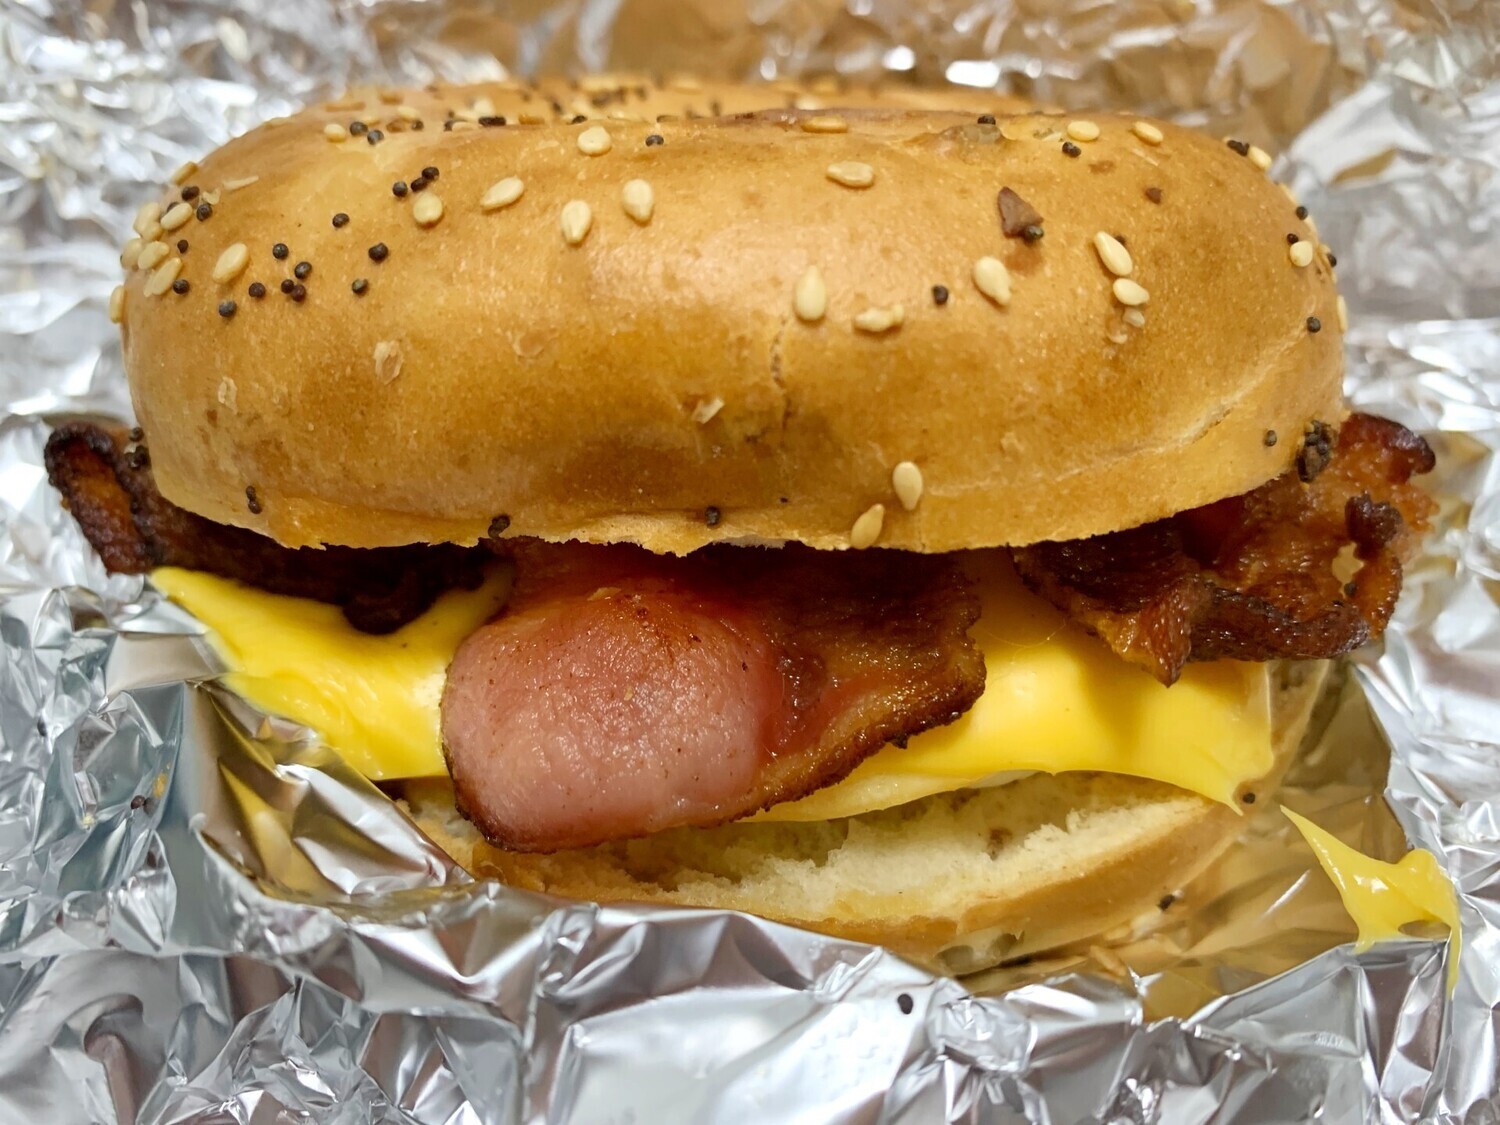 New York Bagel Bacon, Egg and Cheese Sandwich